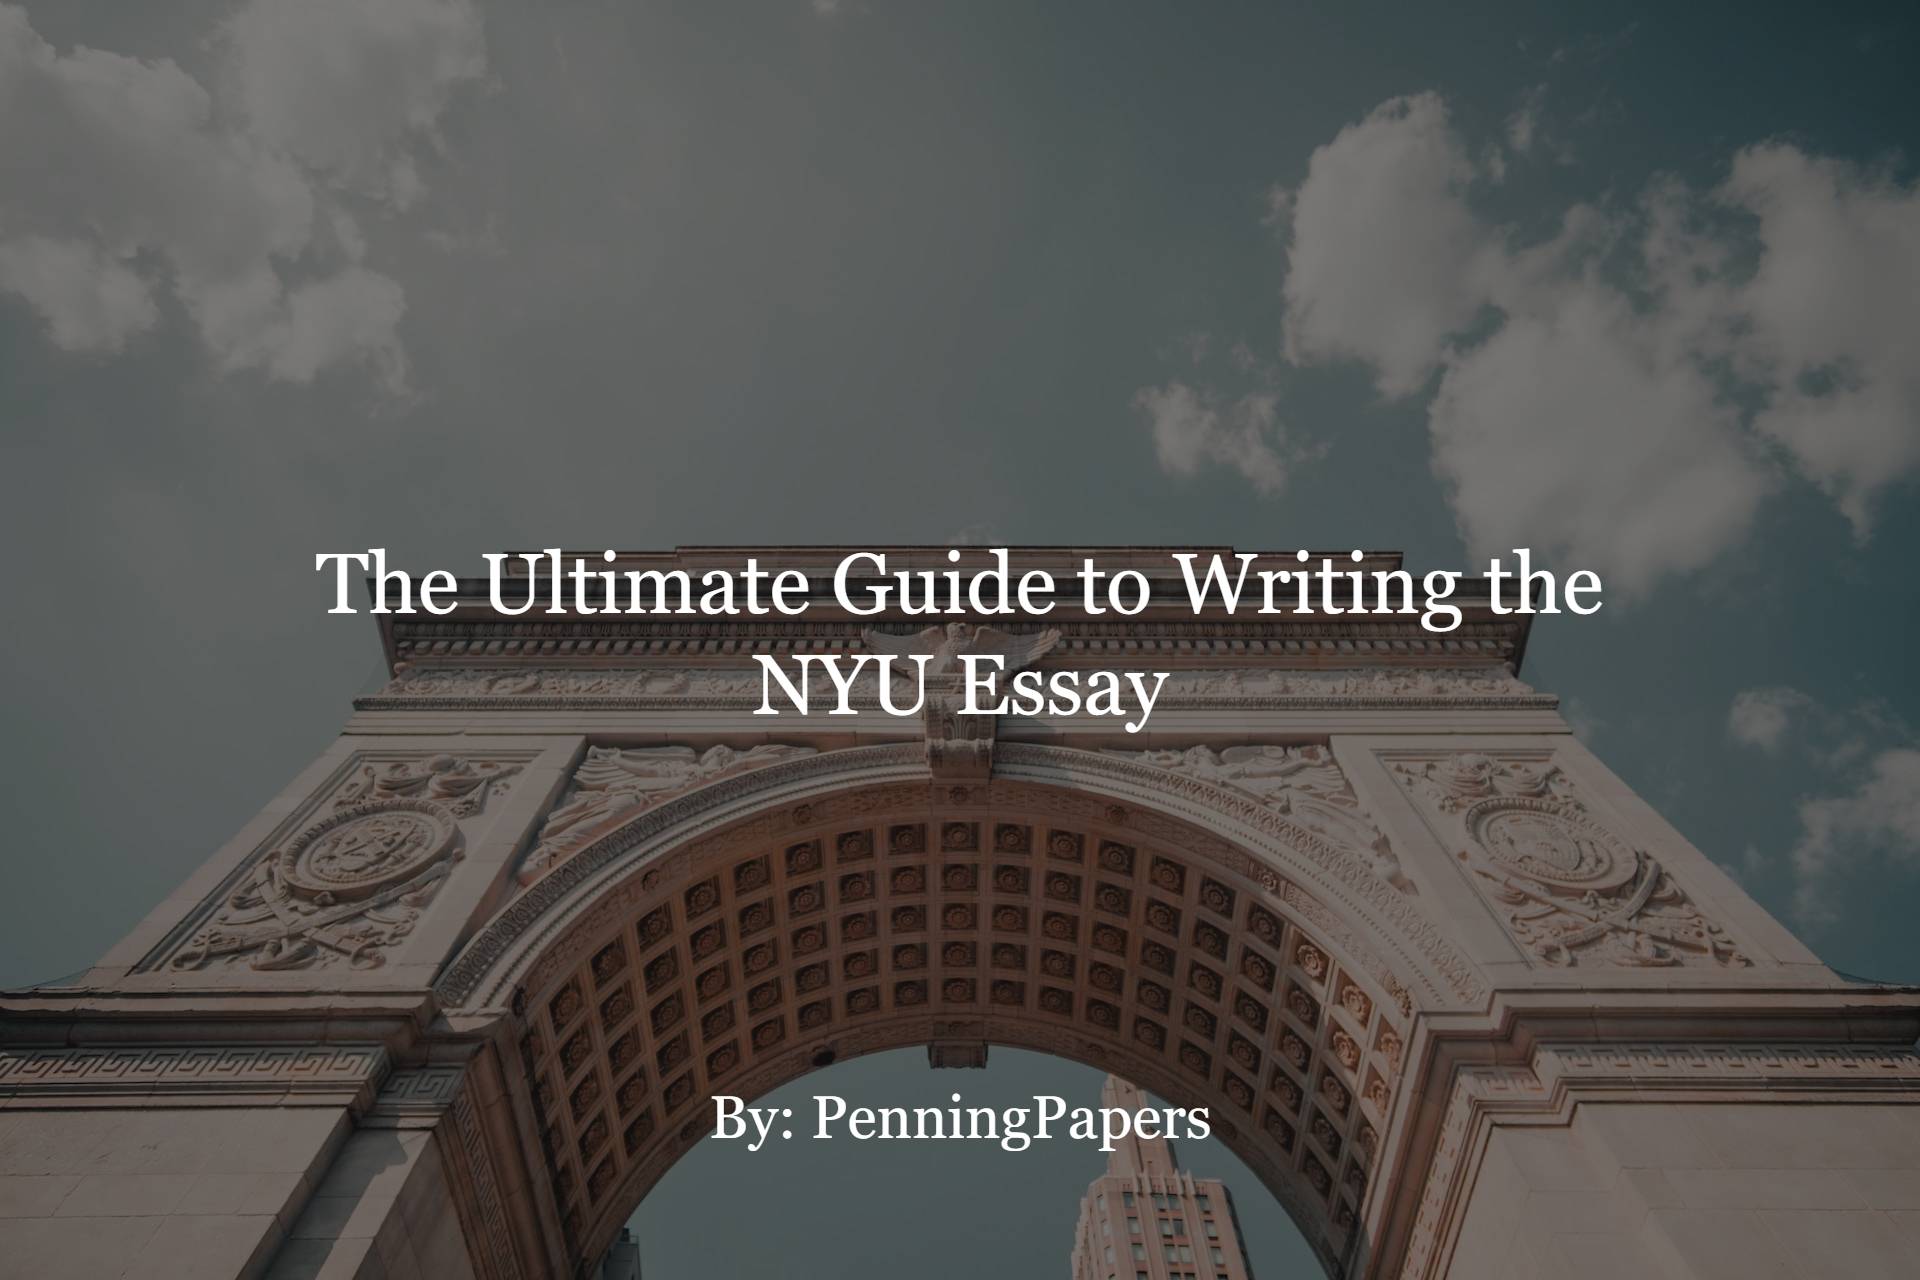 The Ultimate Guide to Writing the NYU Essay PenningPapers